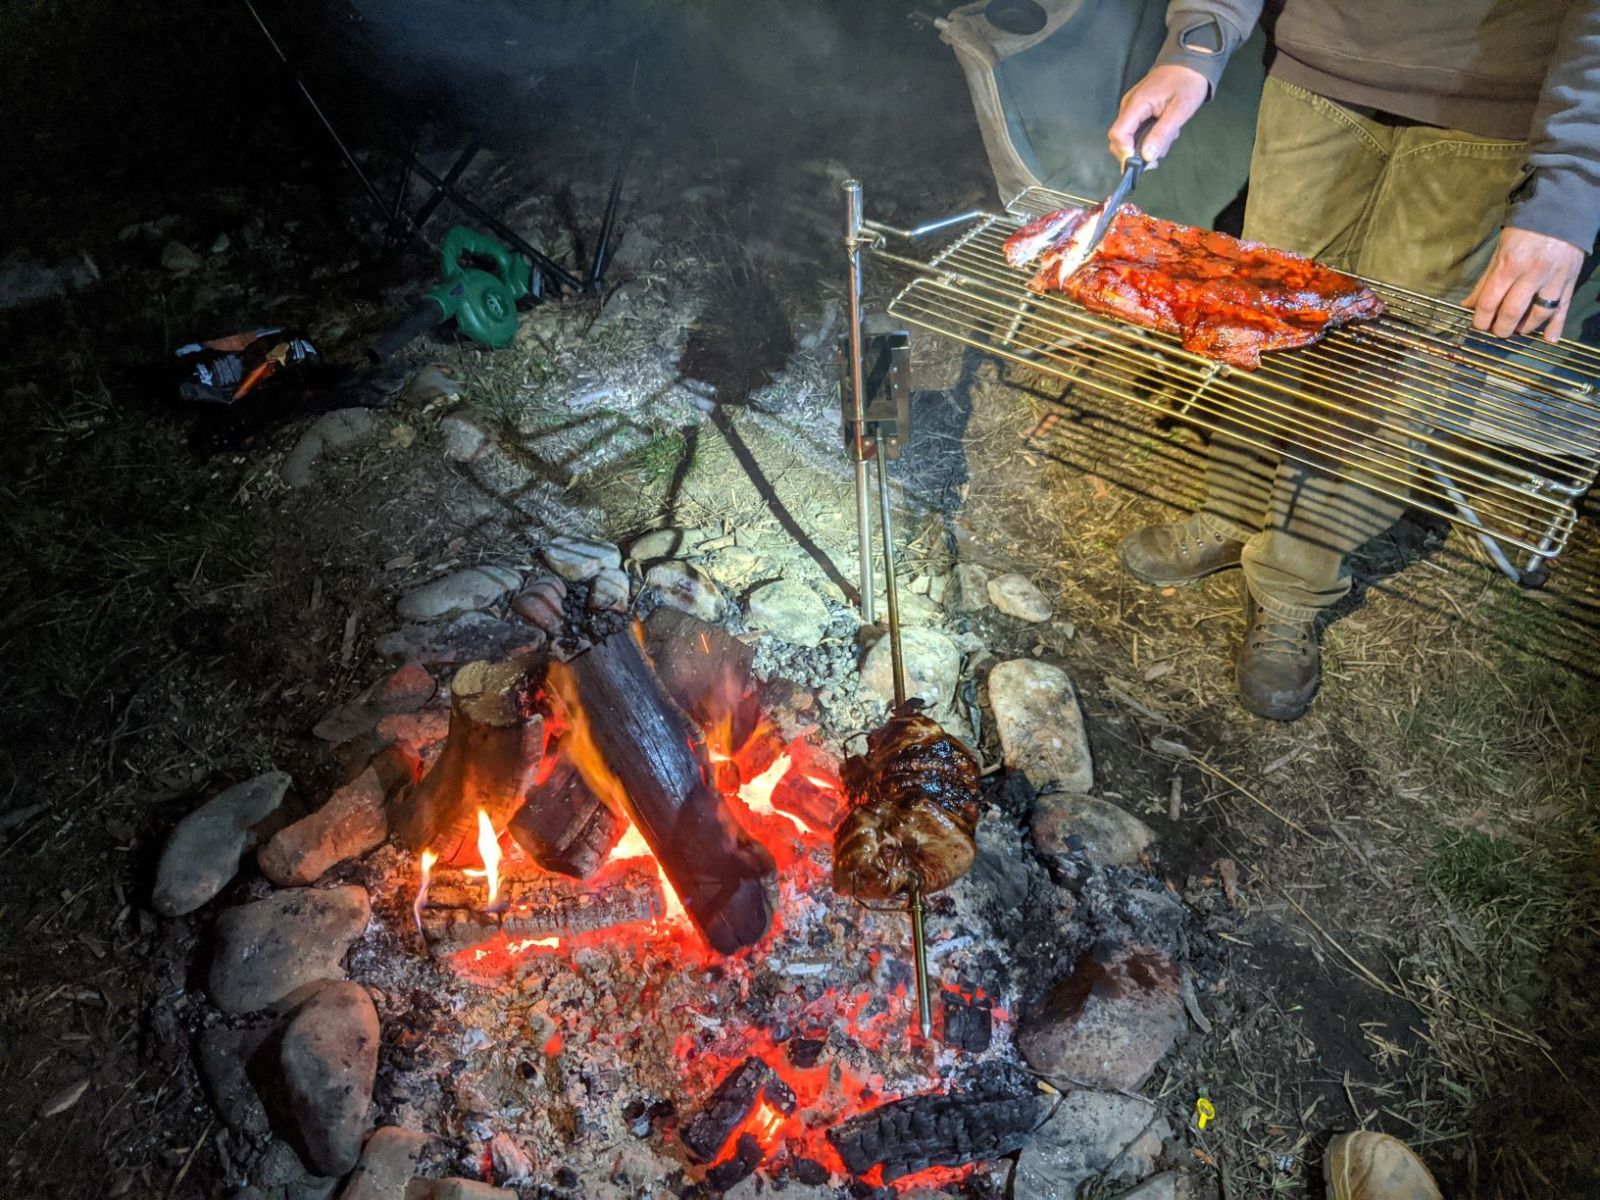 This image shows robs being carved on a stainless steel folding camp grill